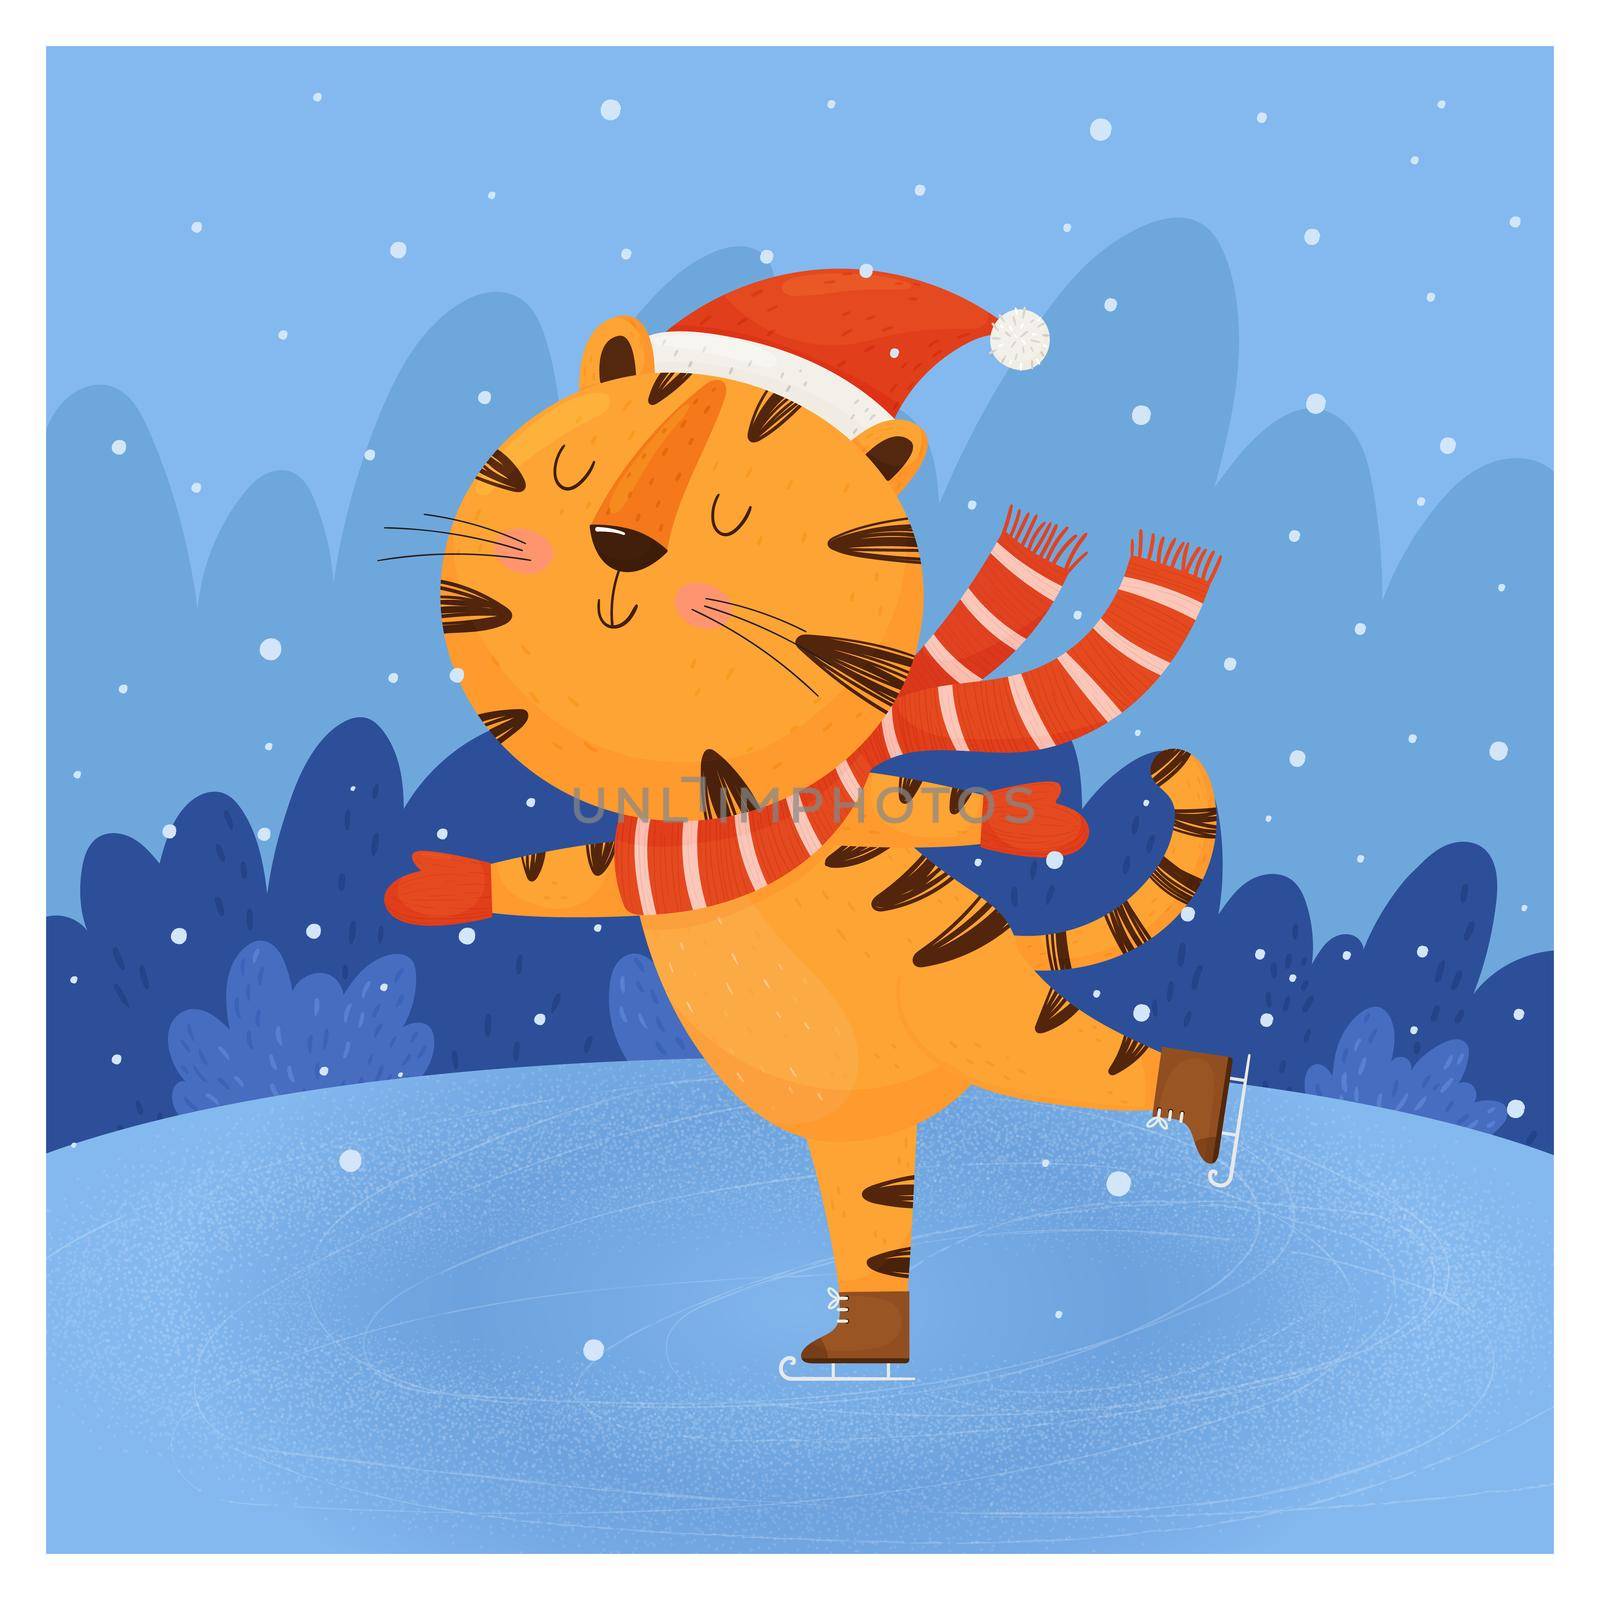 Greeting card template with funny ice skating tiger. Vector illustration in children's cartoon style. by Lena_Khmelniuk